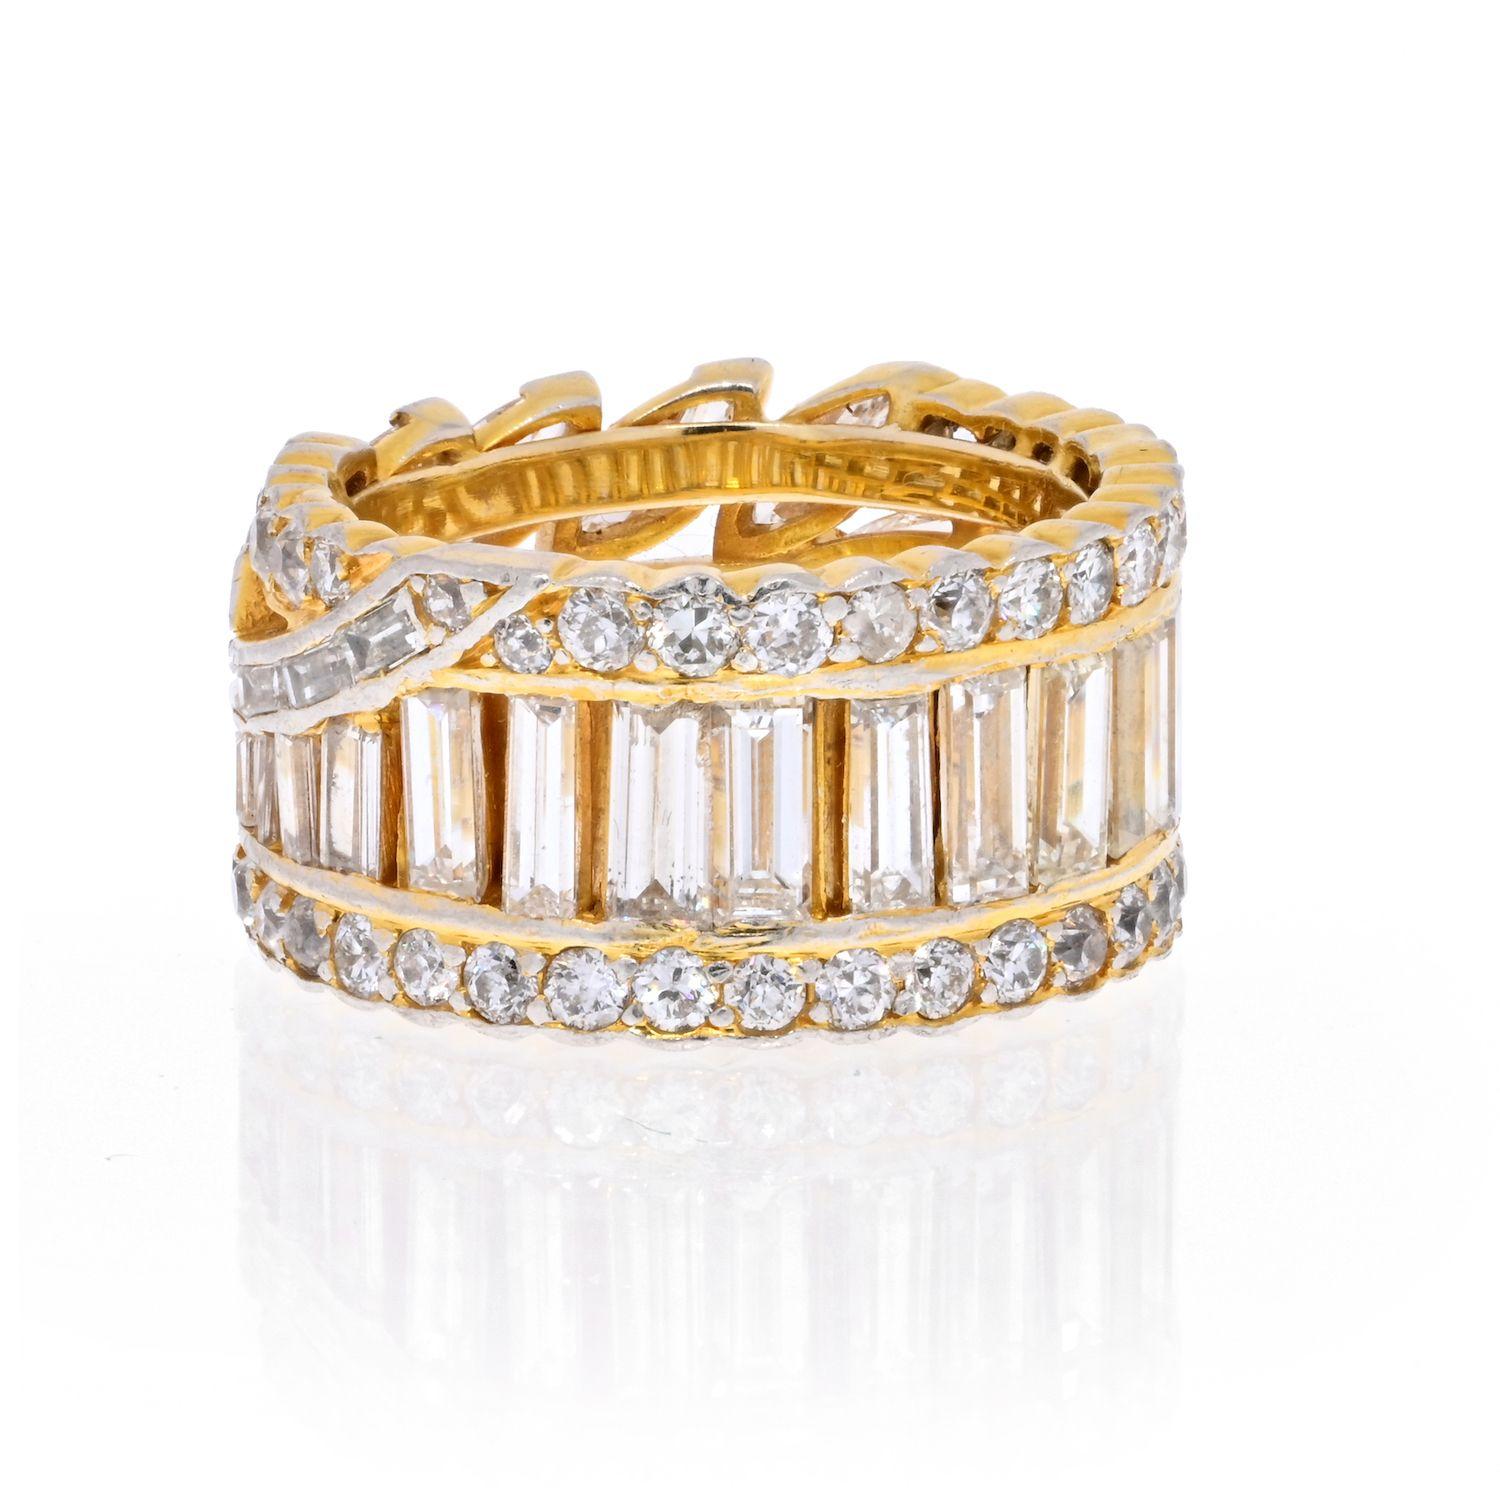 18K Yellow Gold round, marquise and baguette vintage eternity band. 7.00cts worth of diamonds. Diamonds are set all the way around, the fron tof the band with a geometric floral style and the back with straight cut baguettes framed by round cut